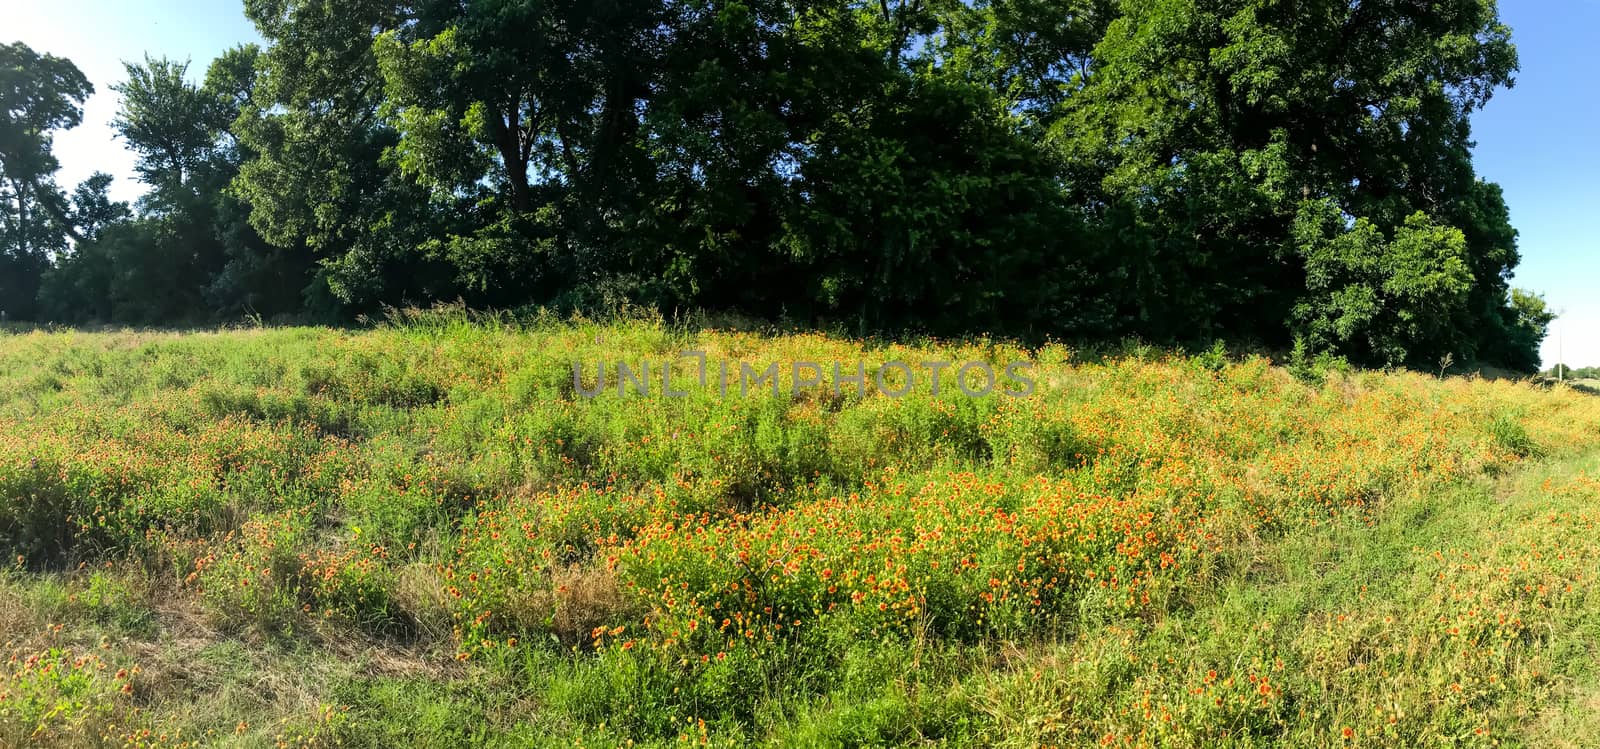 Panorama view blossom meadow of Indian Blanket wildflower at with mature tree in background at Coppell, Texas, USA. Gaillardia pulchella North American species of short-lived flowering plants